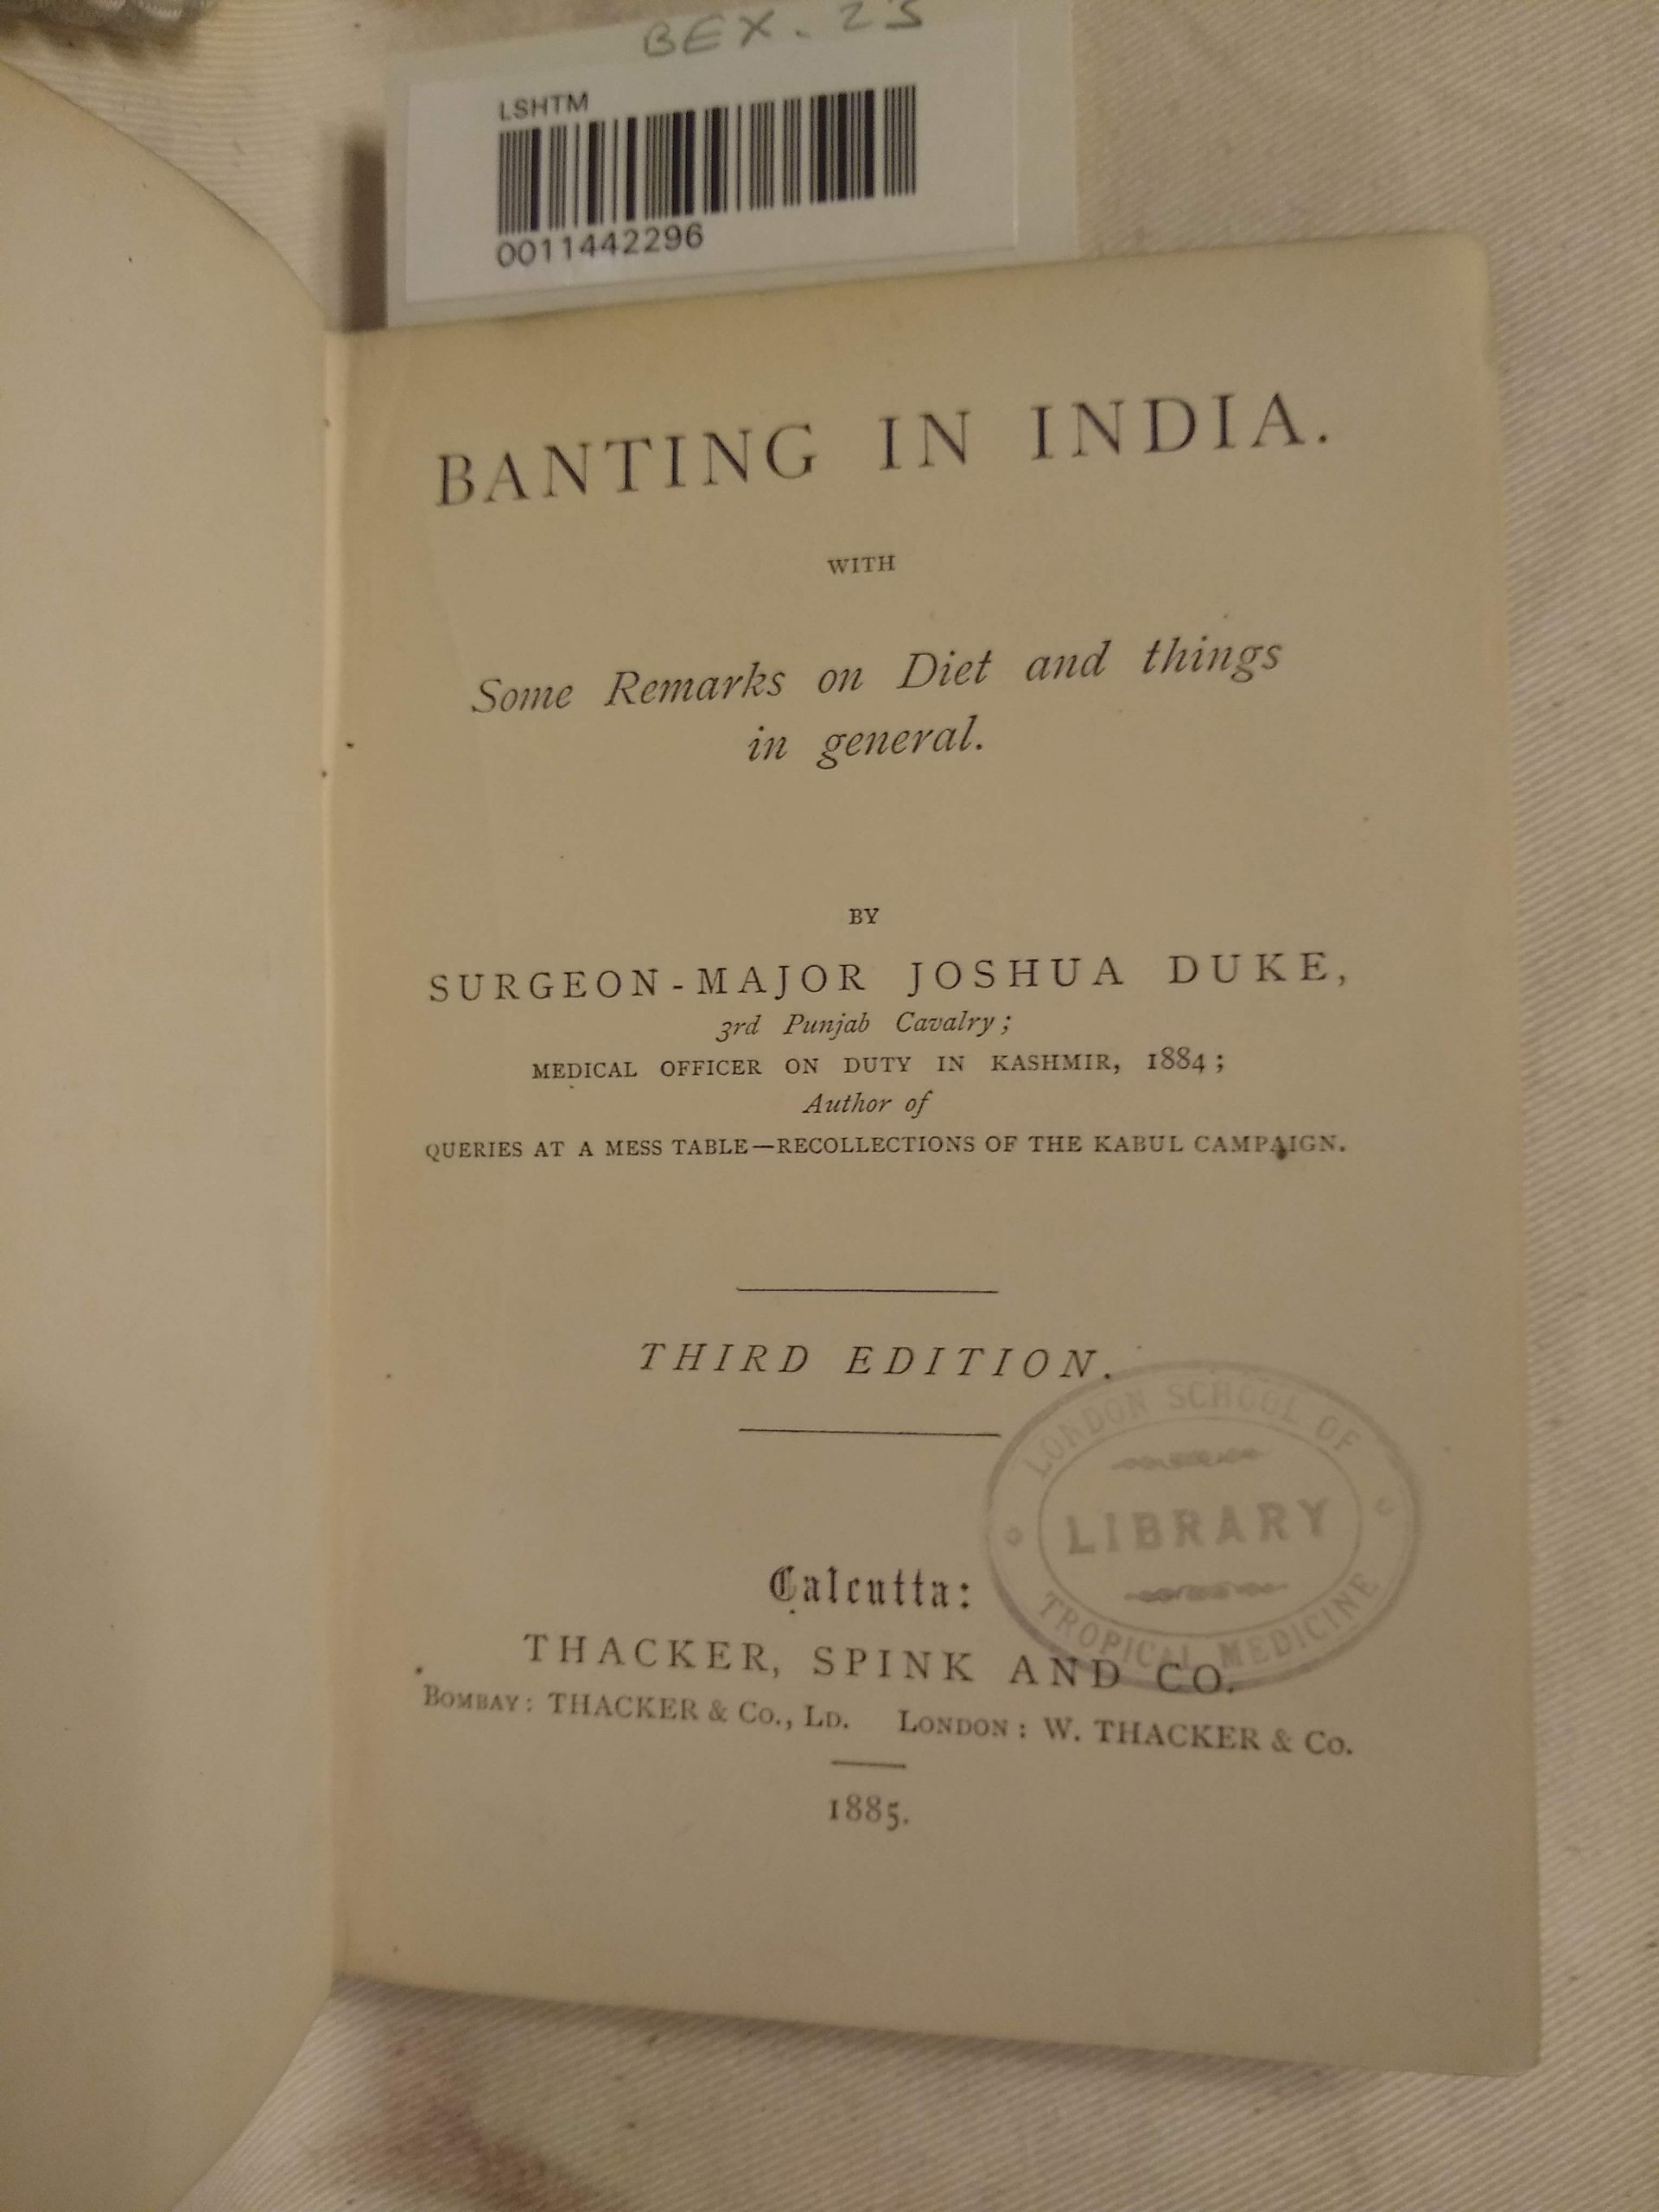 banting-in-india-4